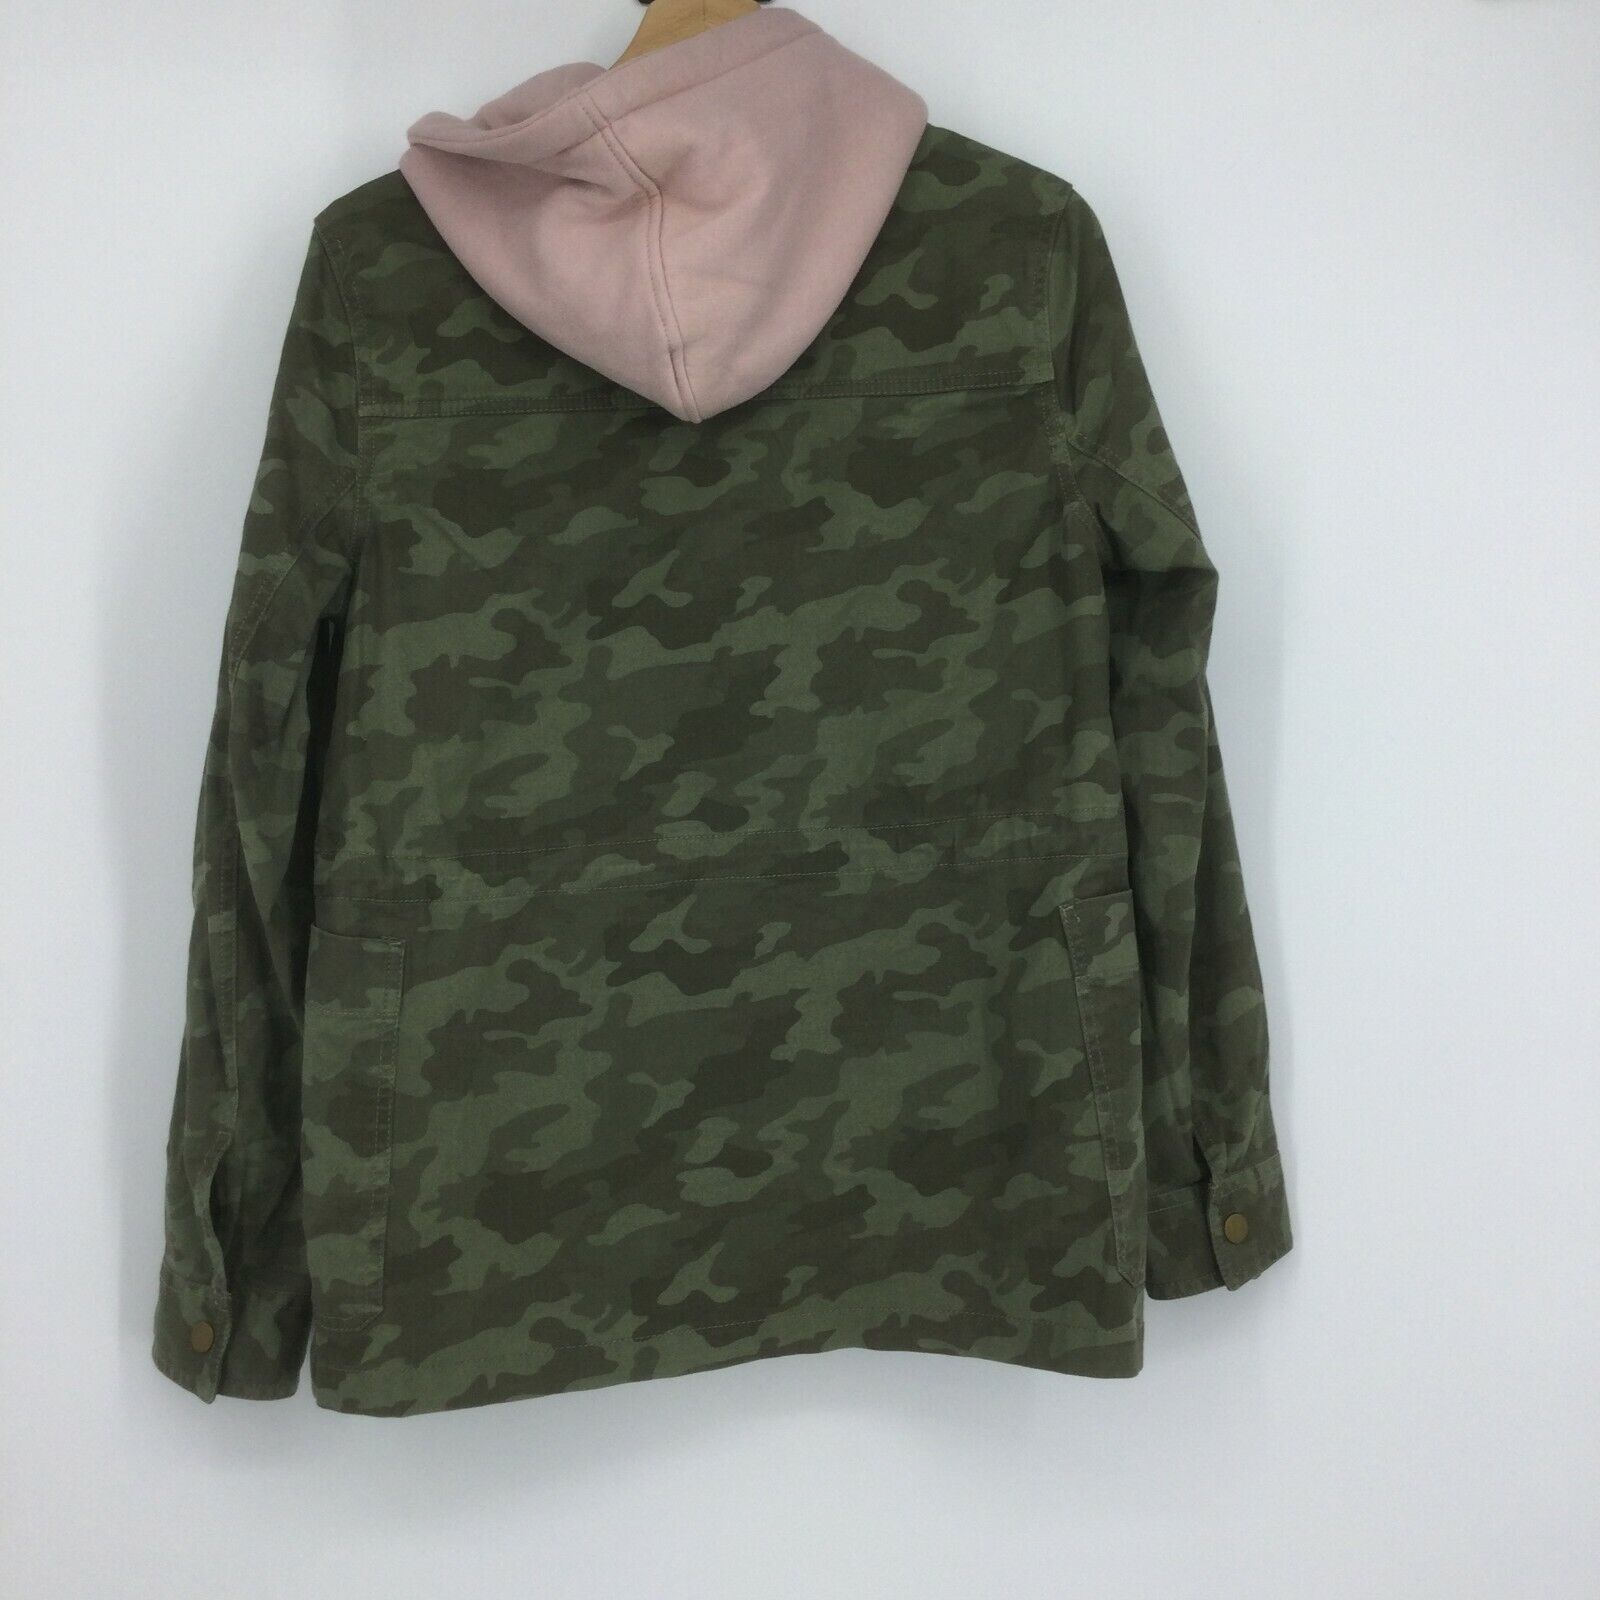 NWT Caslon Womens Olive Green Pink Camo Print Hooded Utility Jacket Size M